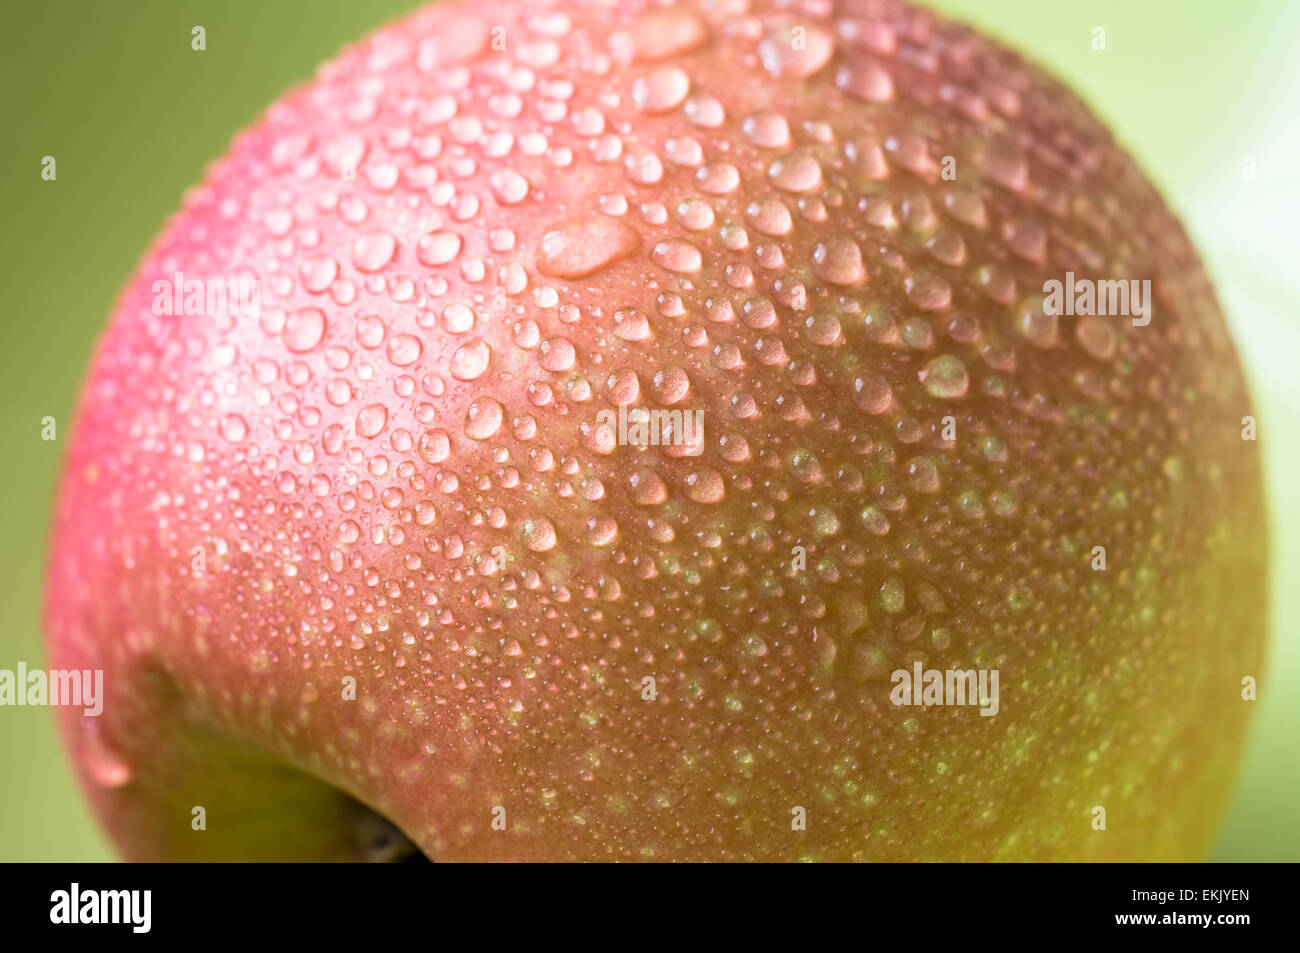 Drops on a red apple. Top view close-up Stock Photo